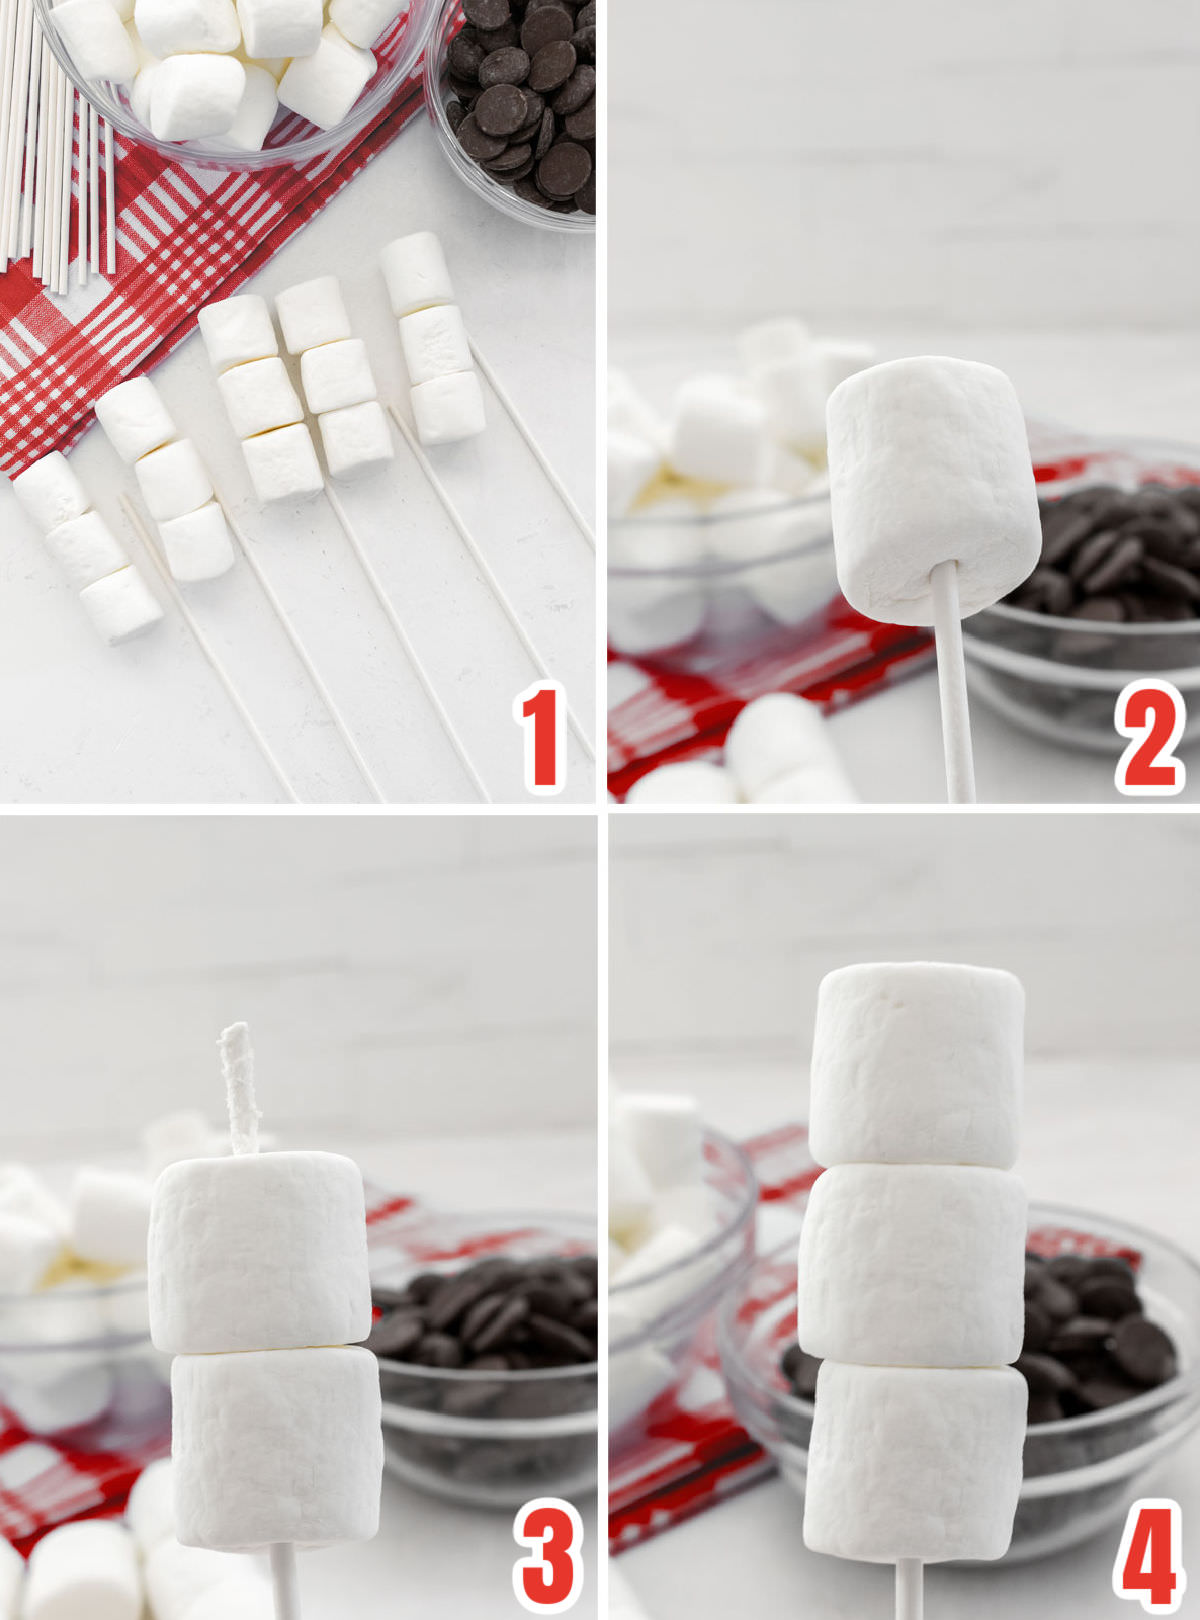 Collage image showing the steps required to create a marshmallow pop using marshmallows and a lollipop stick.